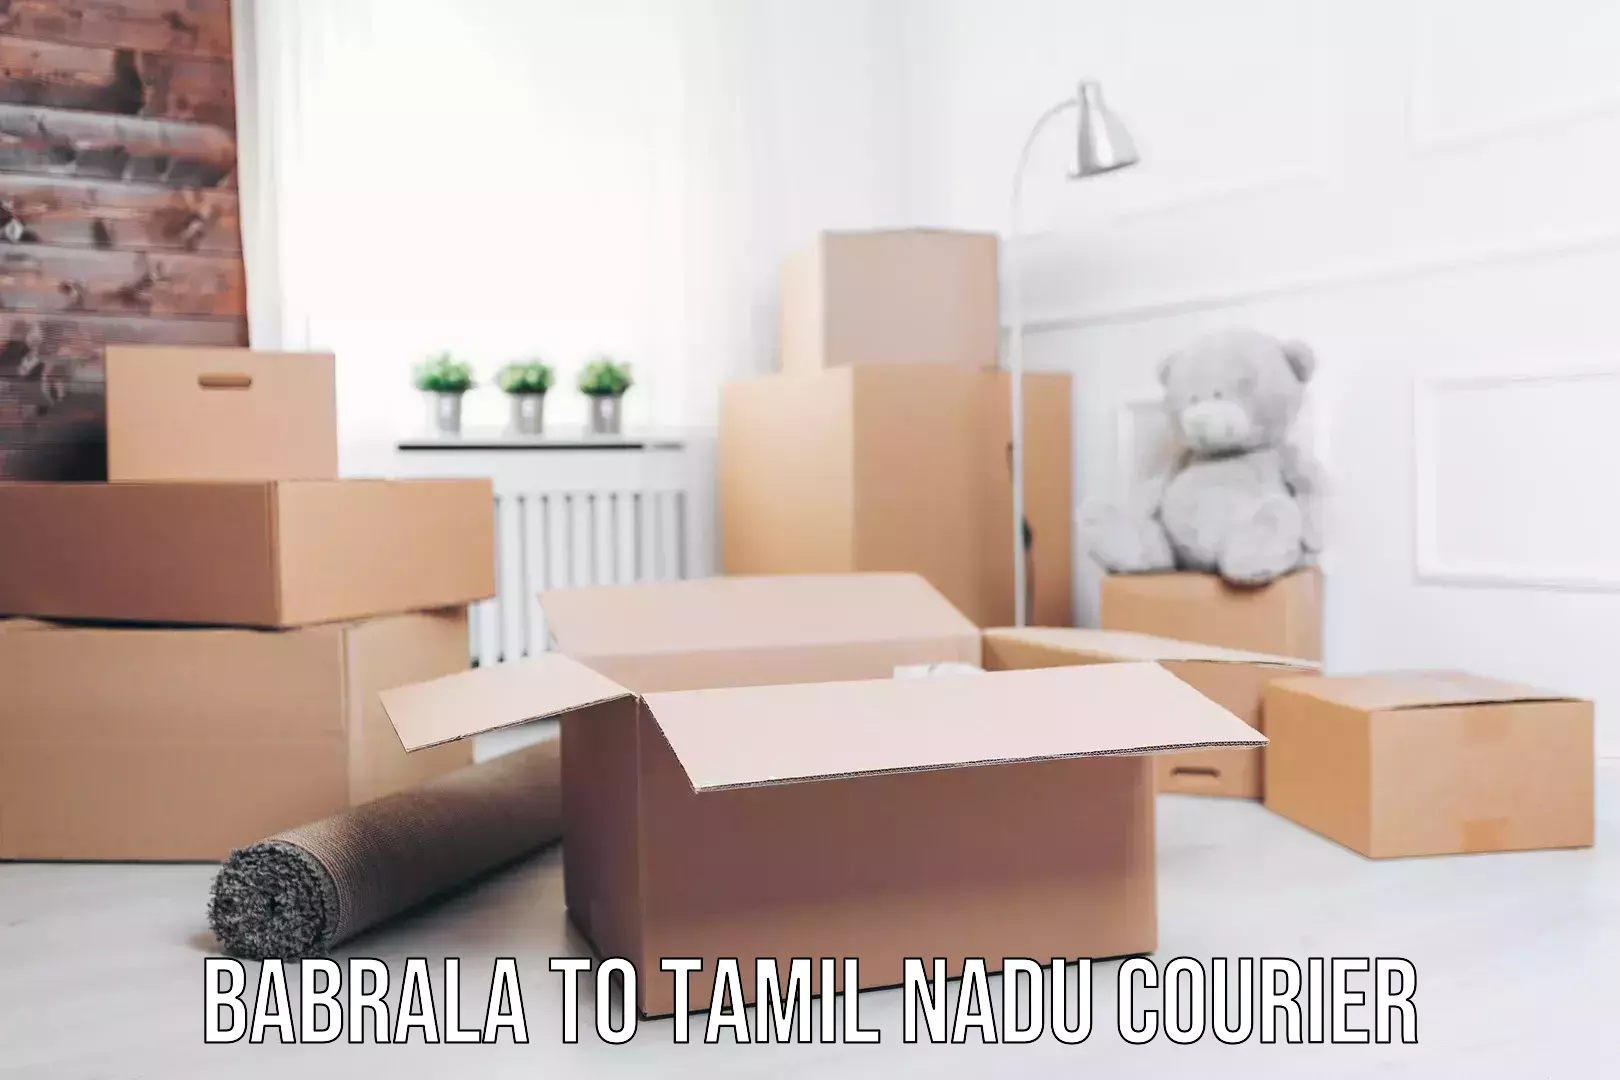 Courier service booking Babrala to Tamil Nadu